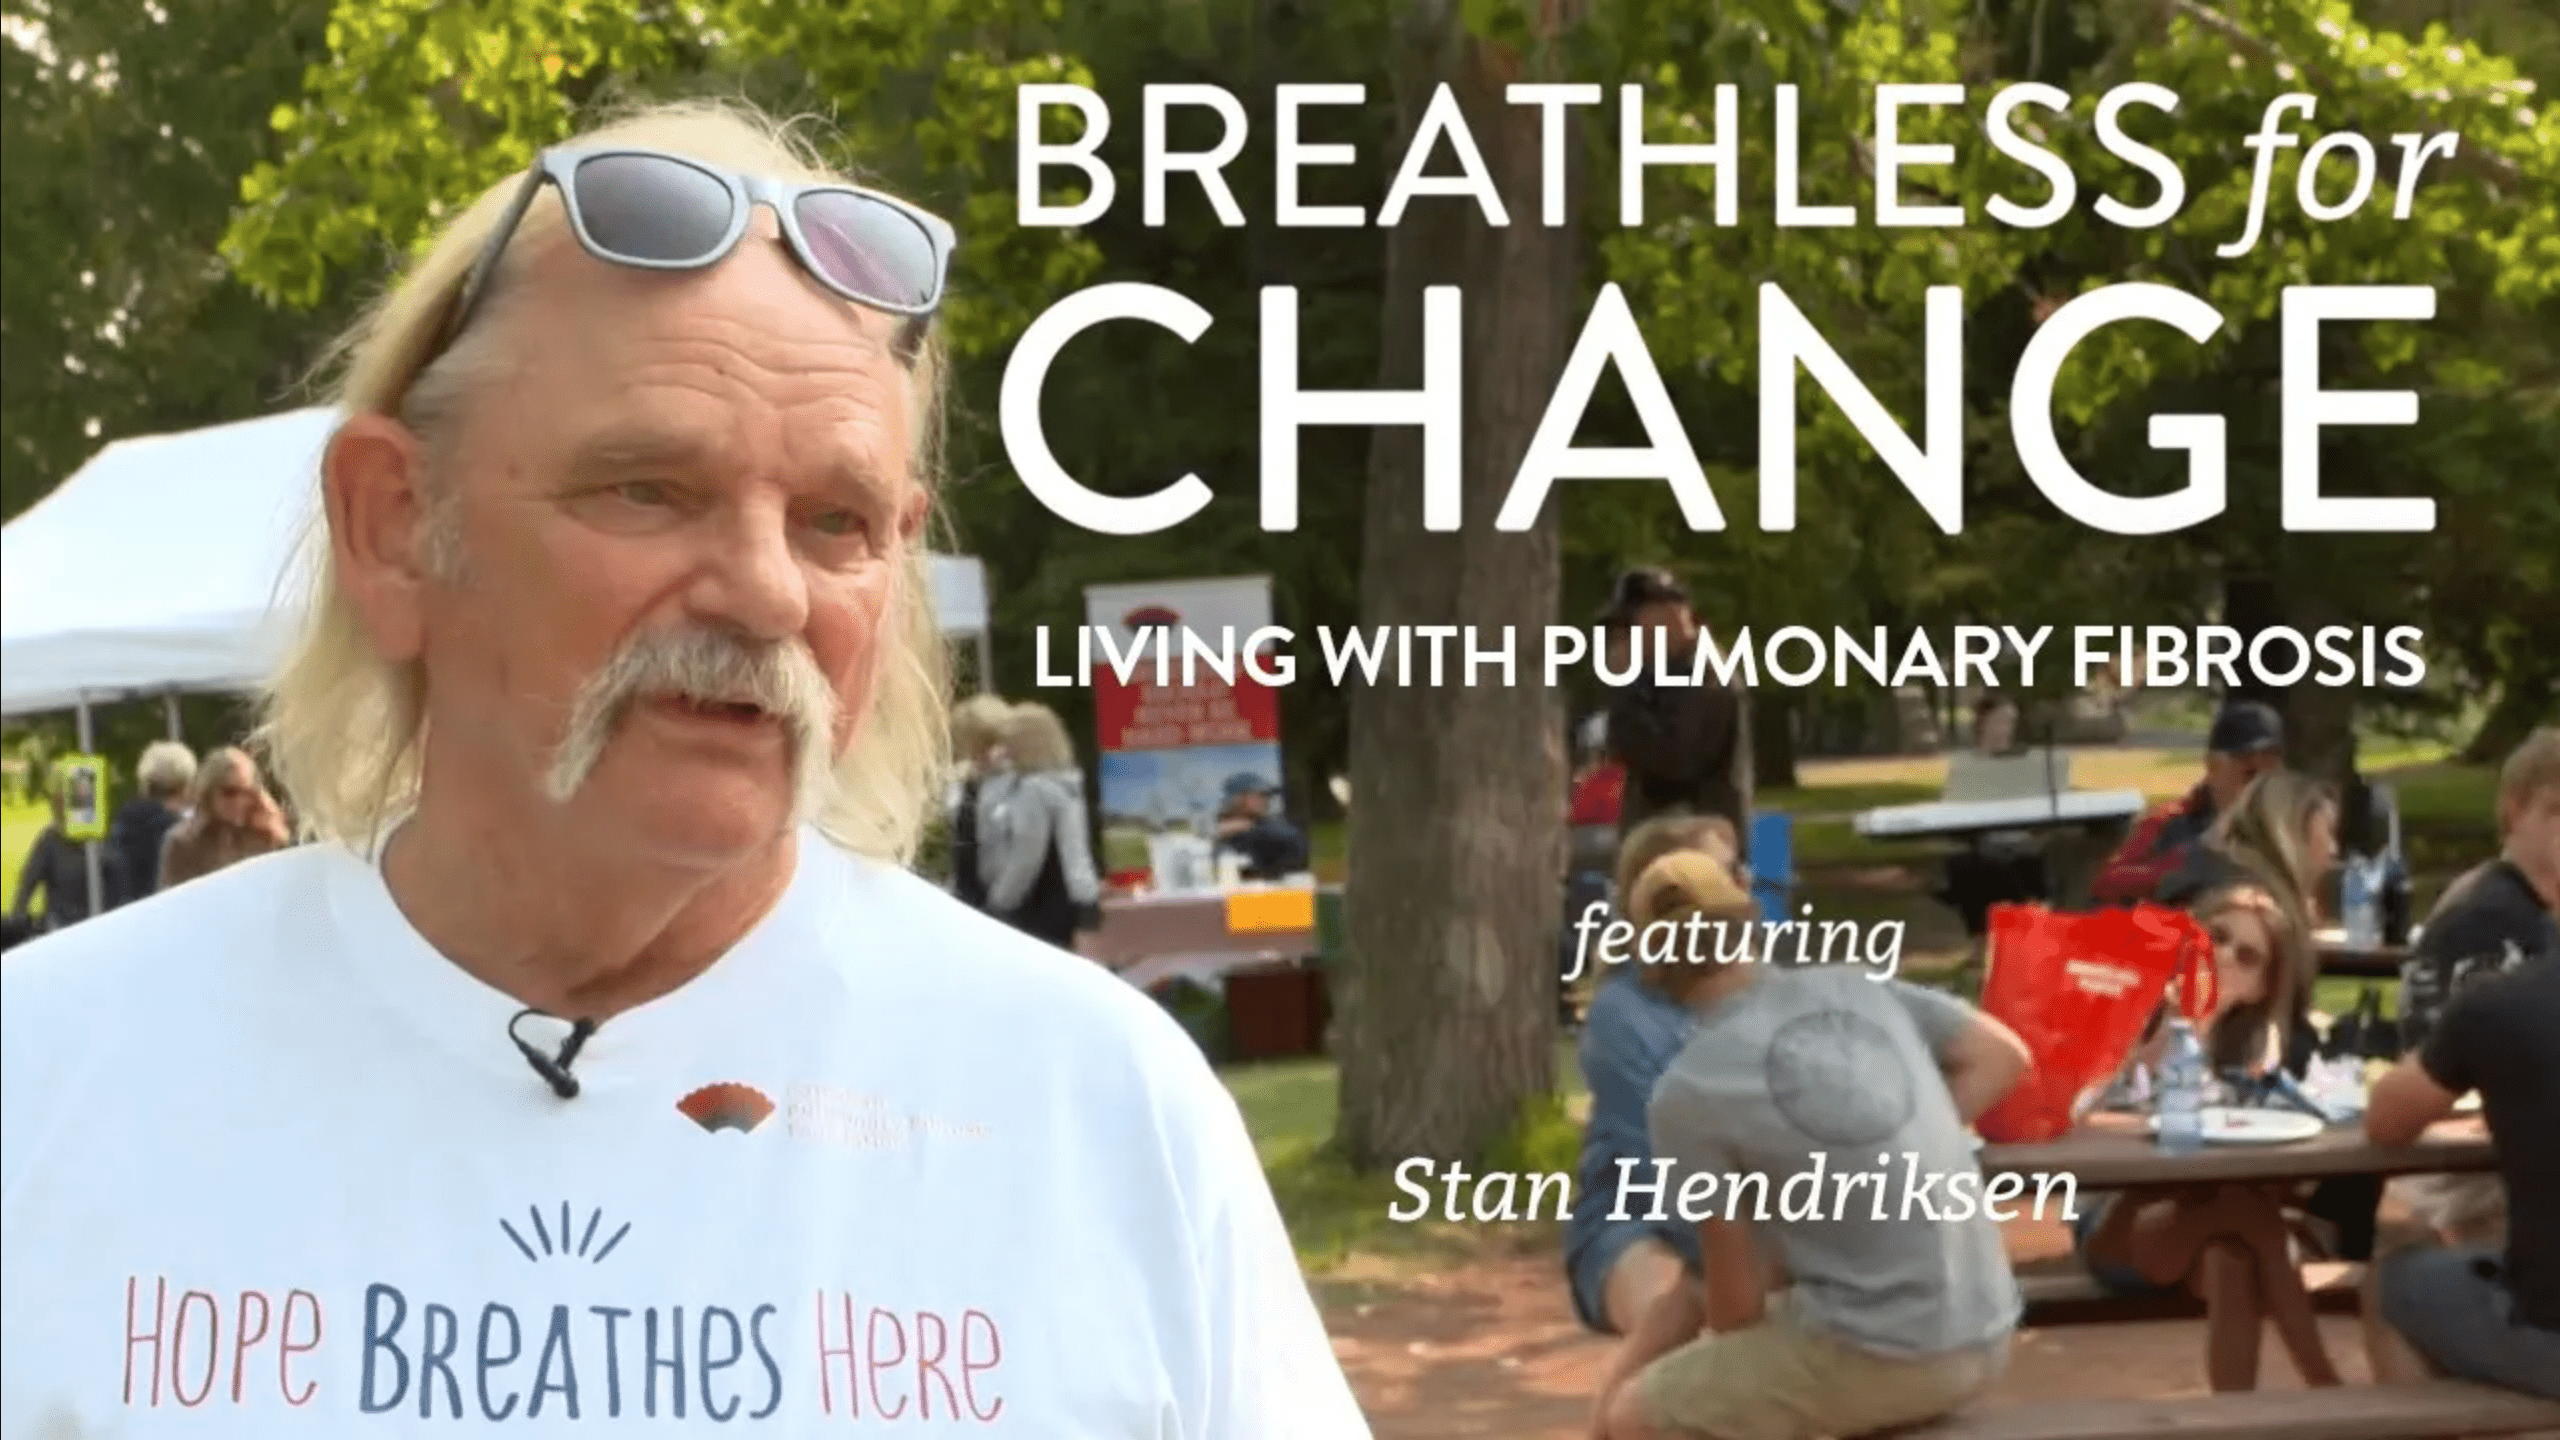 Man with text: "BREATHLESS for CHANGE: LIVING WITH PULMONARY FIBROSIS featuring Stan Hendriksen"